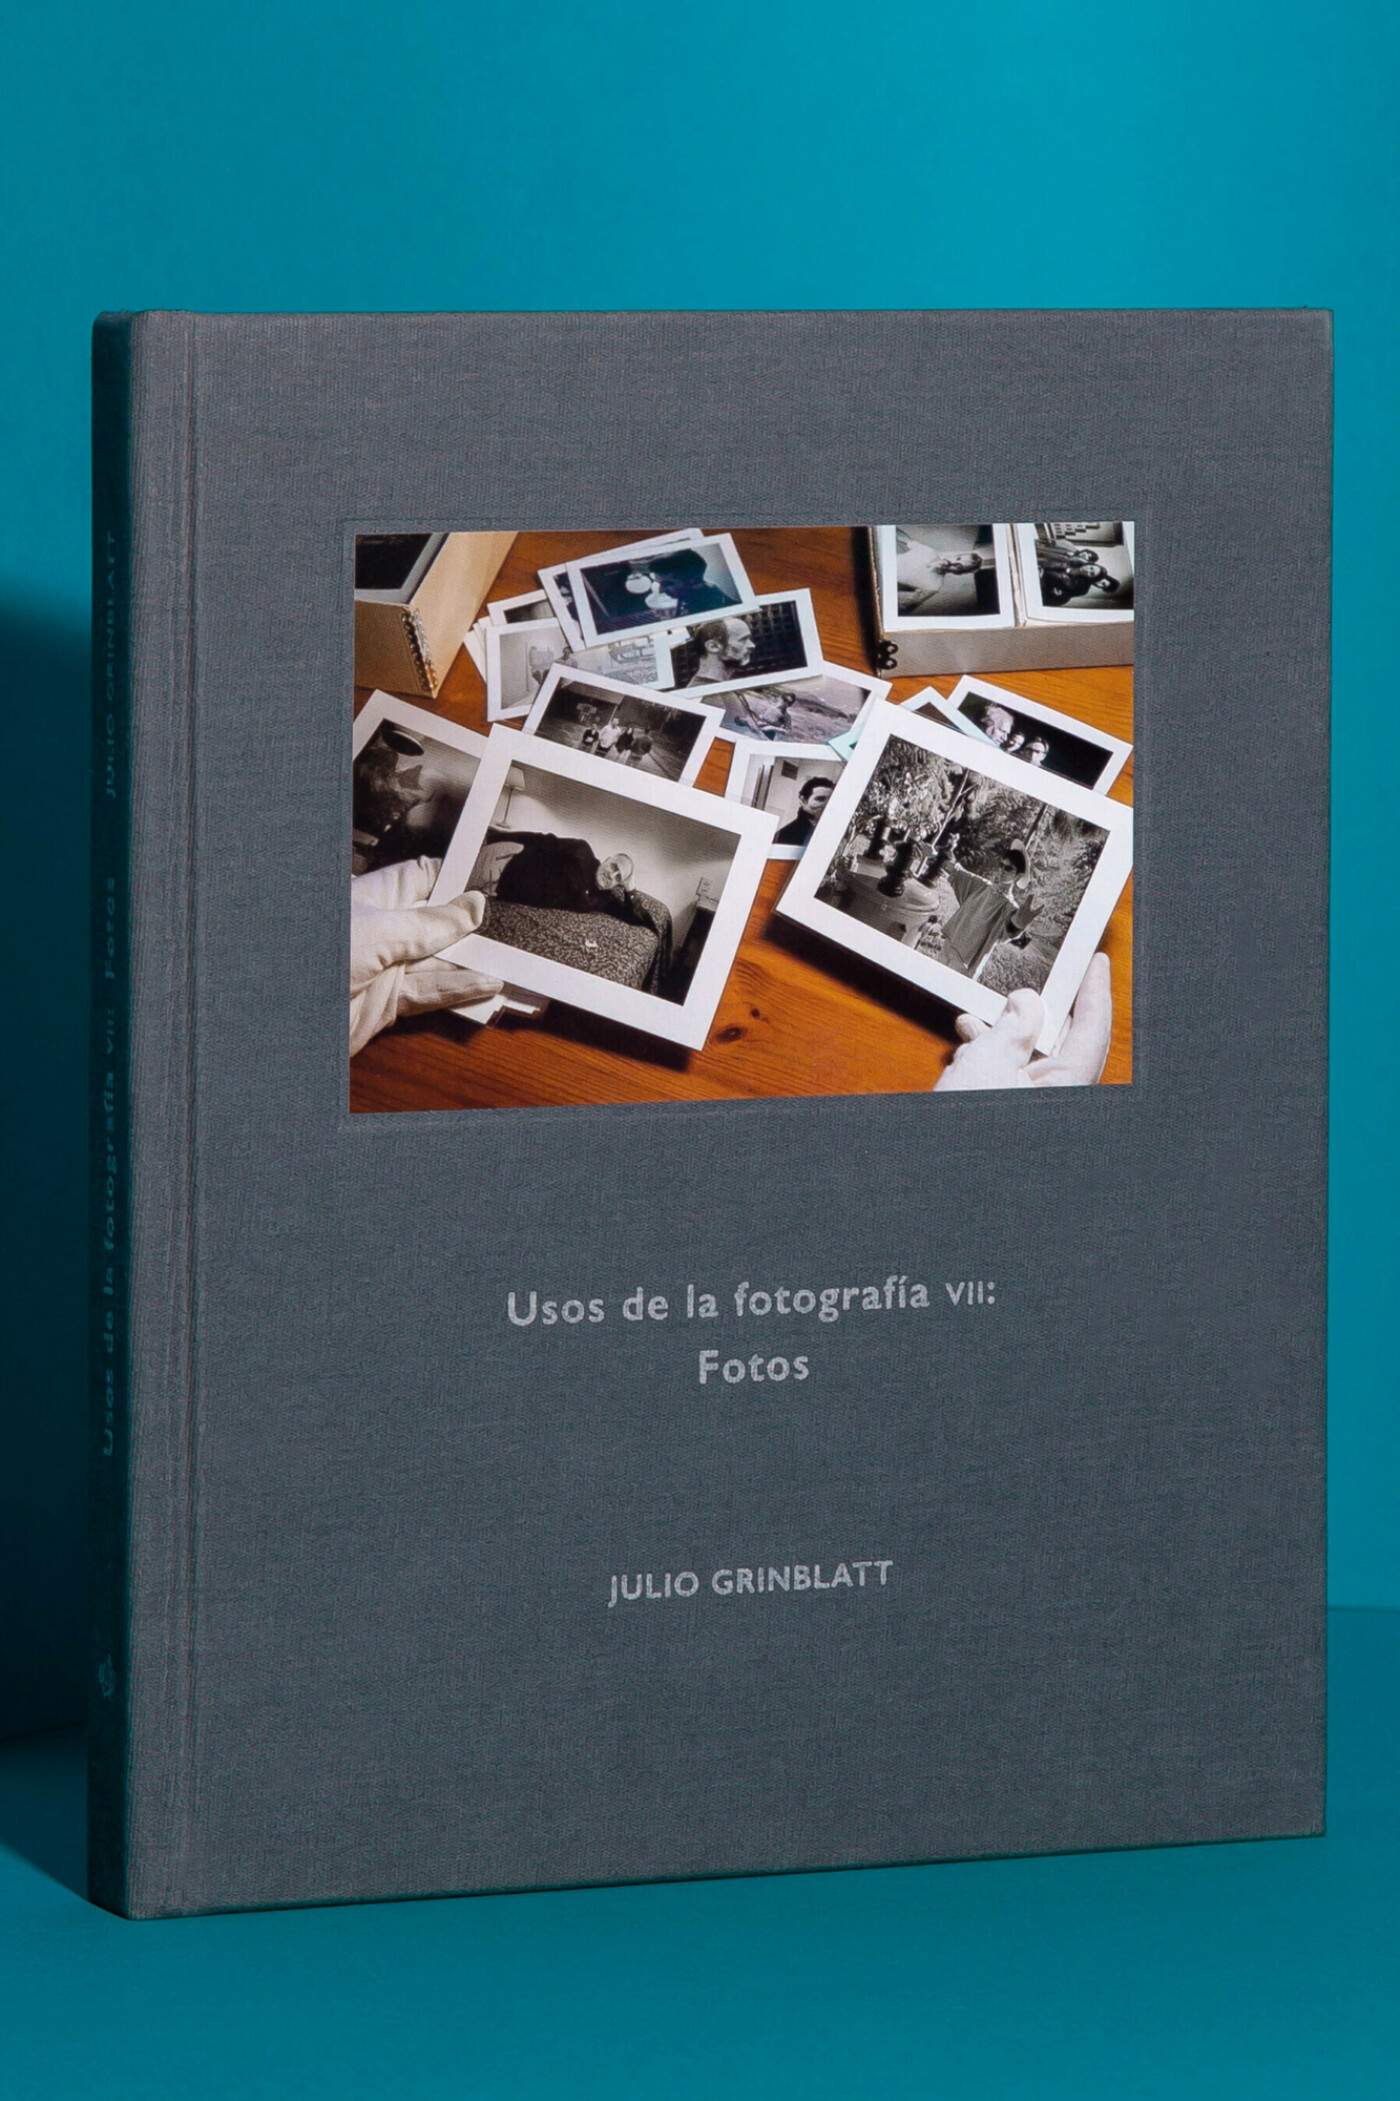 Photograph of a book by Julio Grinblatt positioned upright against a blue background.